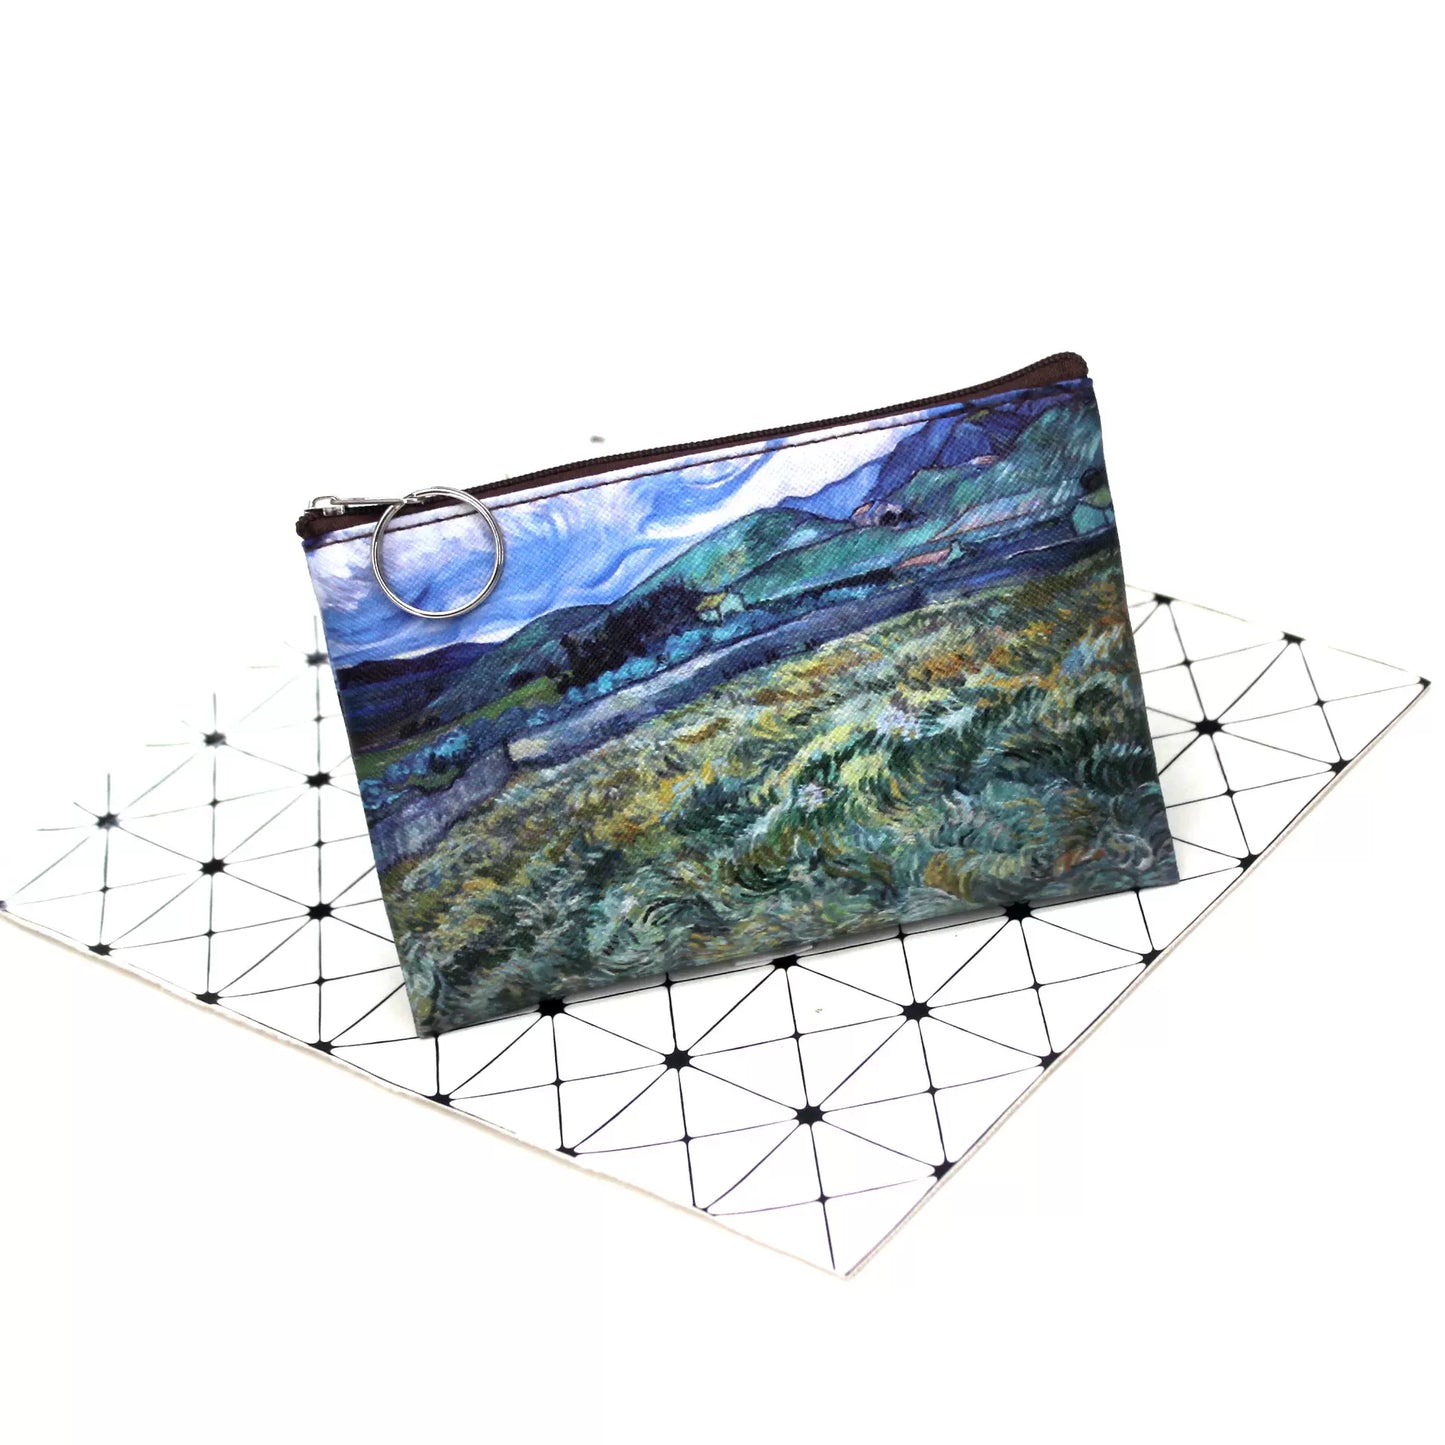 "Scenery of Saint-Remy" makeup pouch